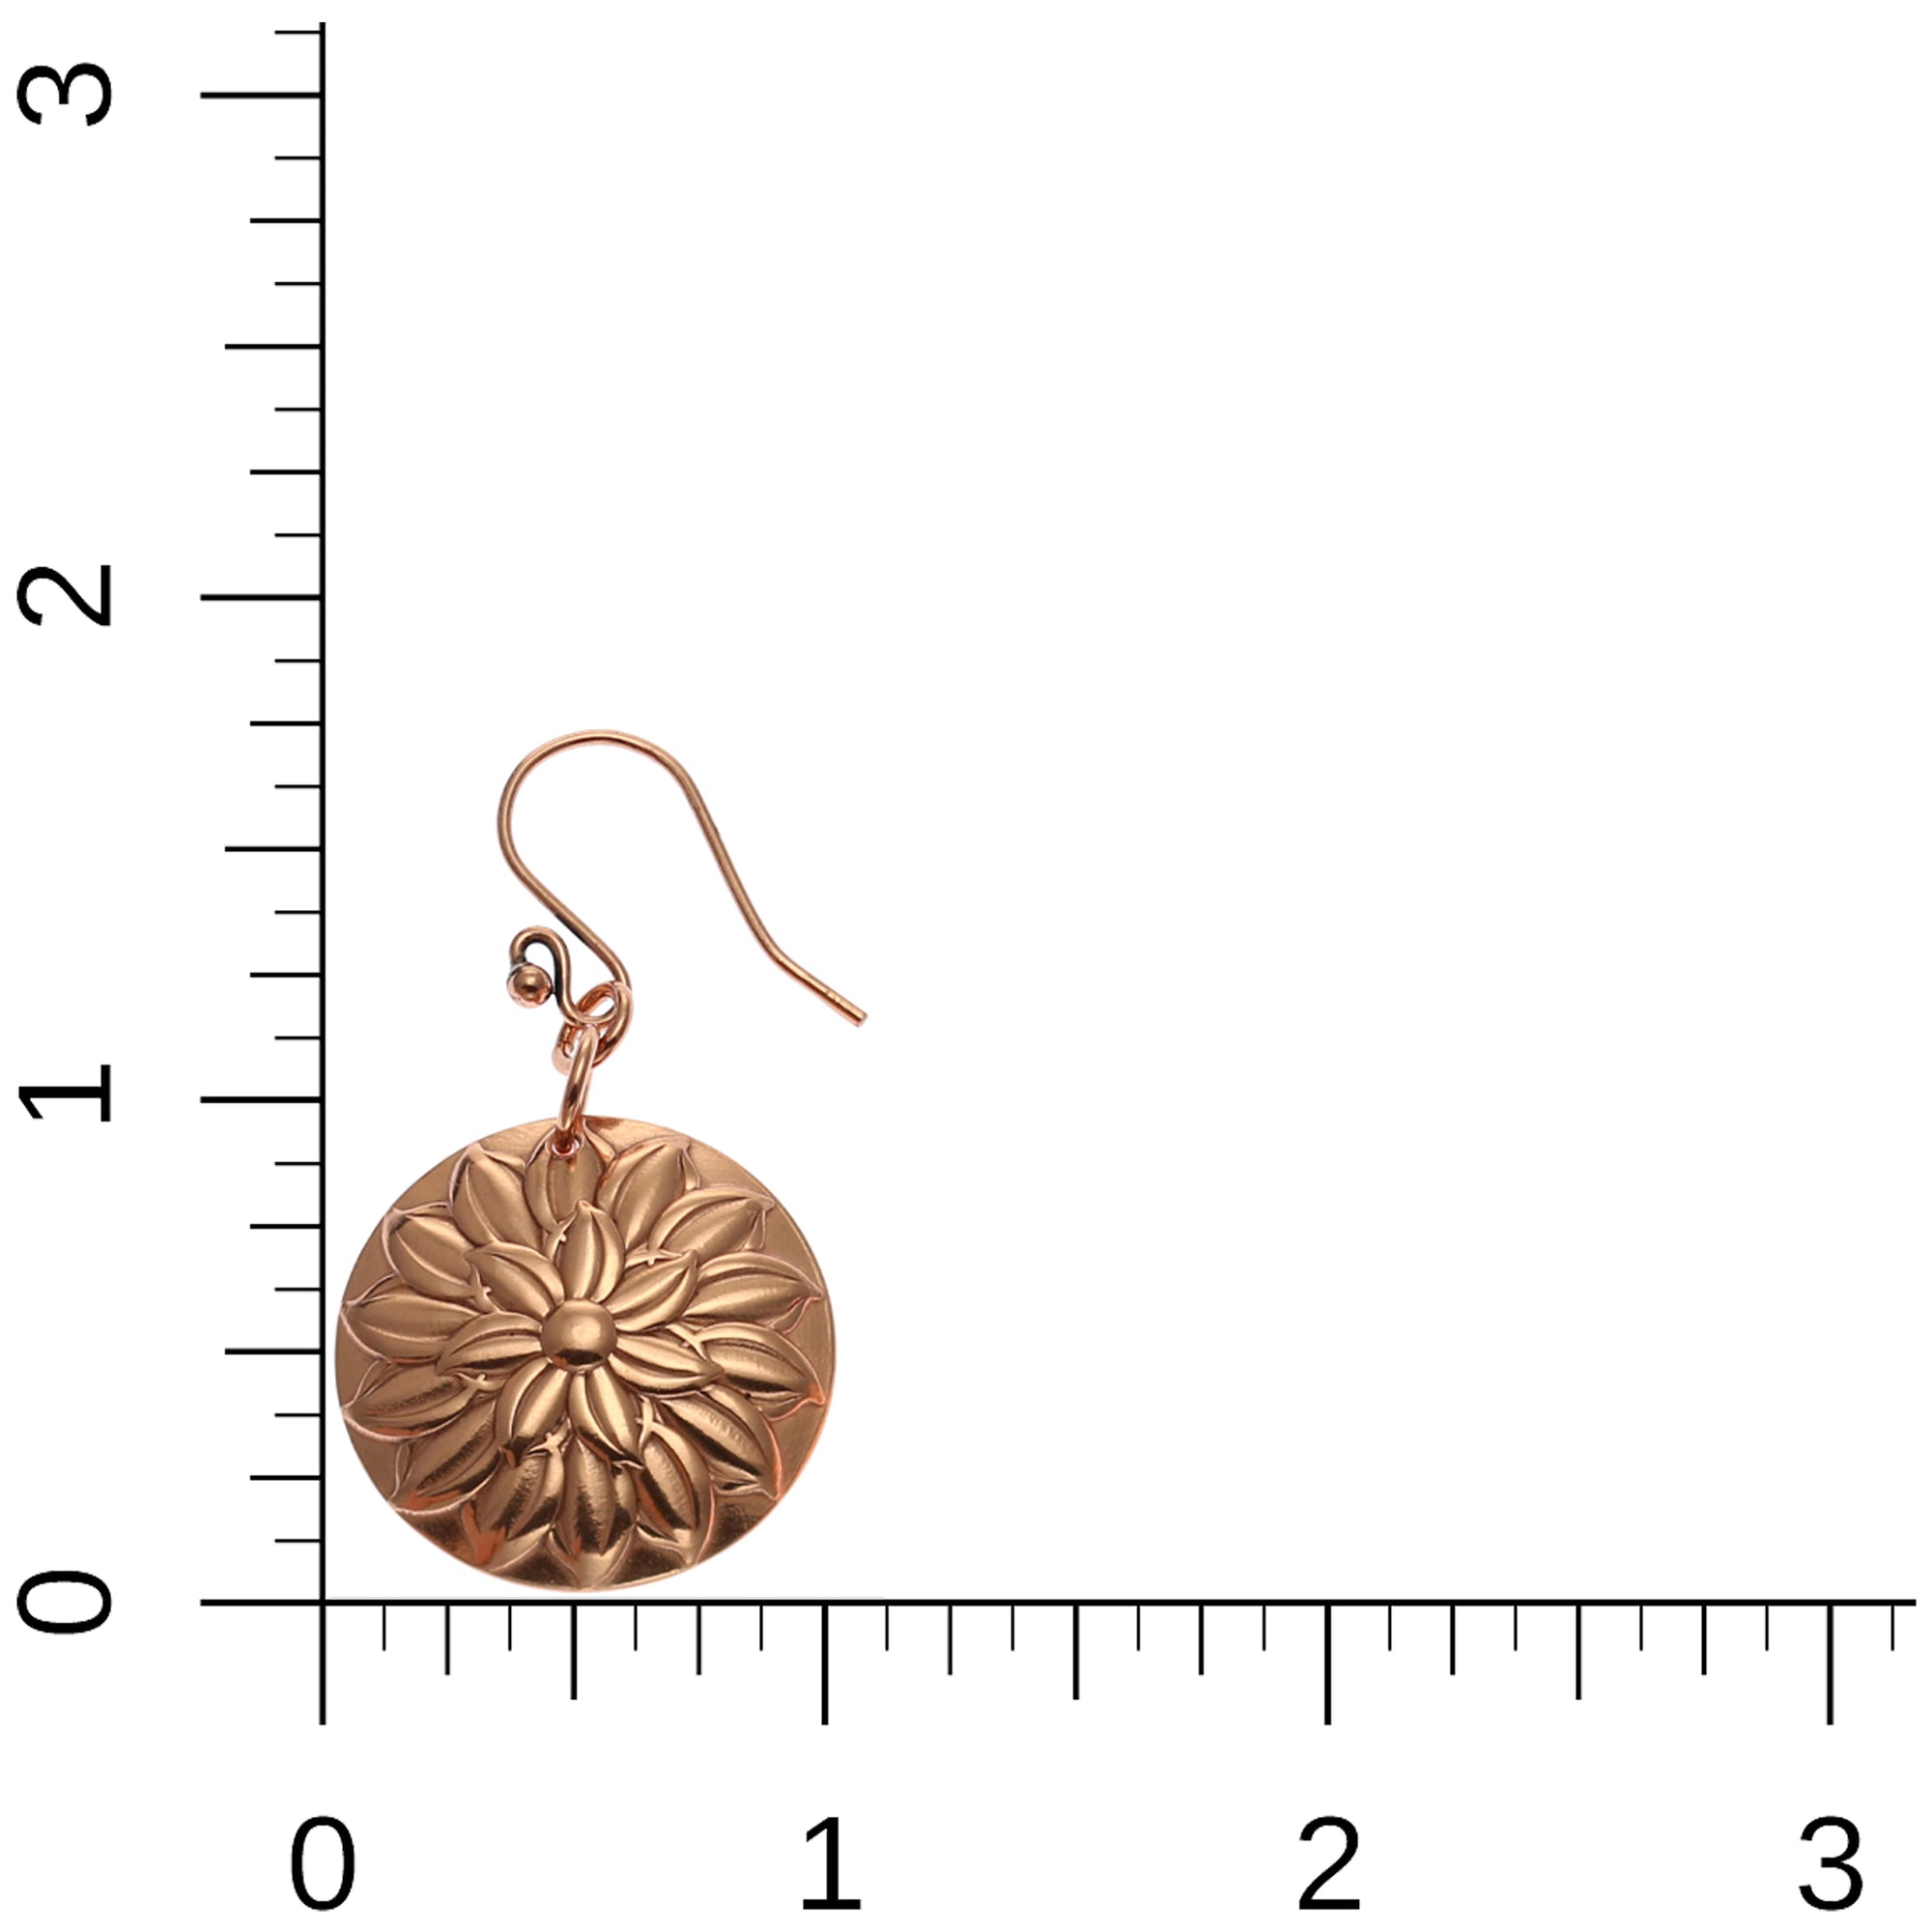 Chrysanthemum Copper Disc Earrings on Ruler for Size Dimensions